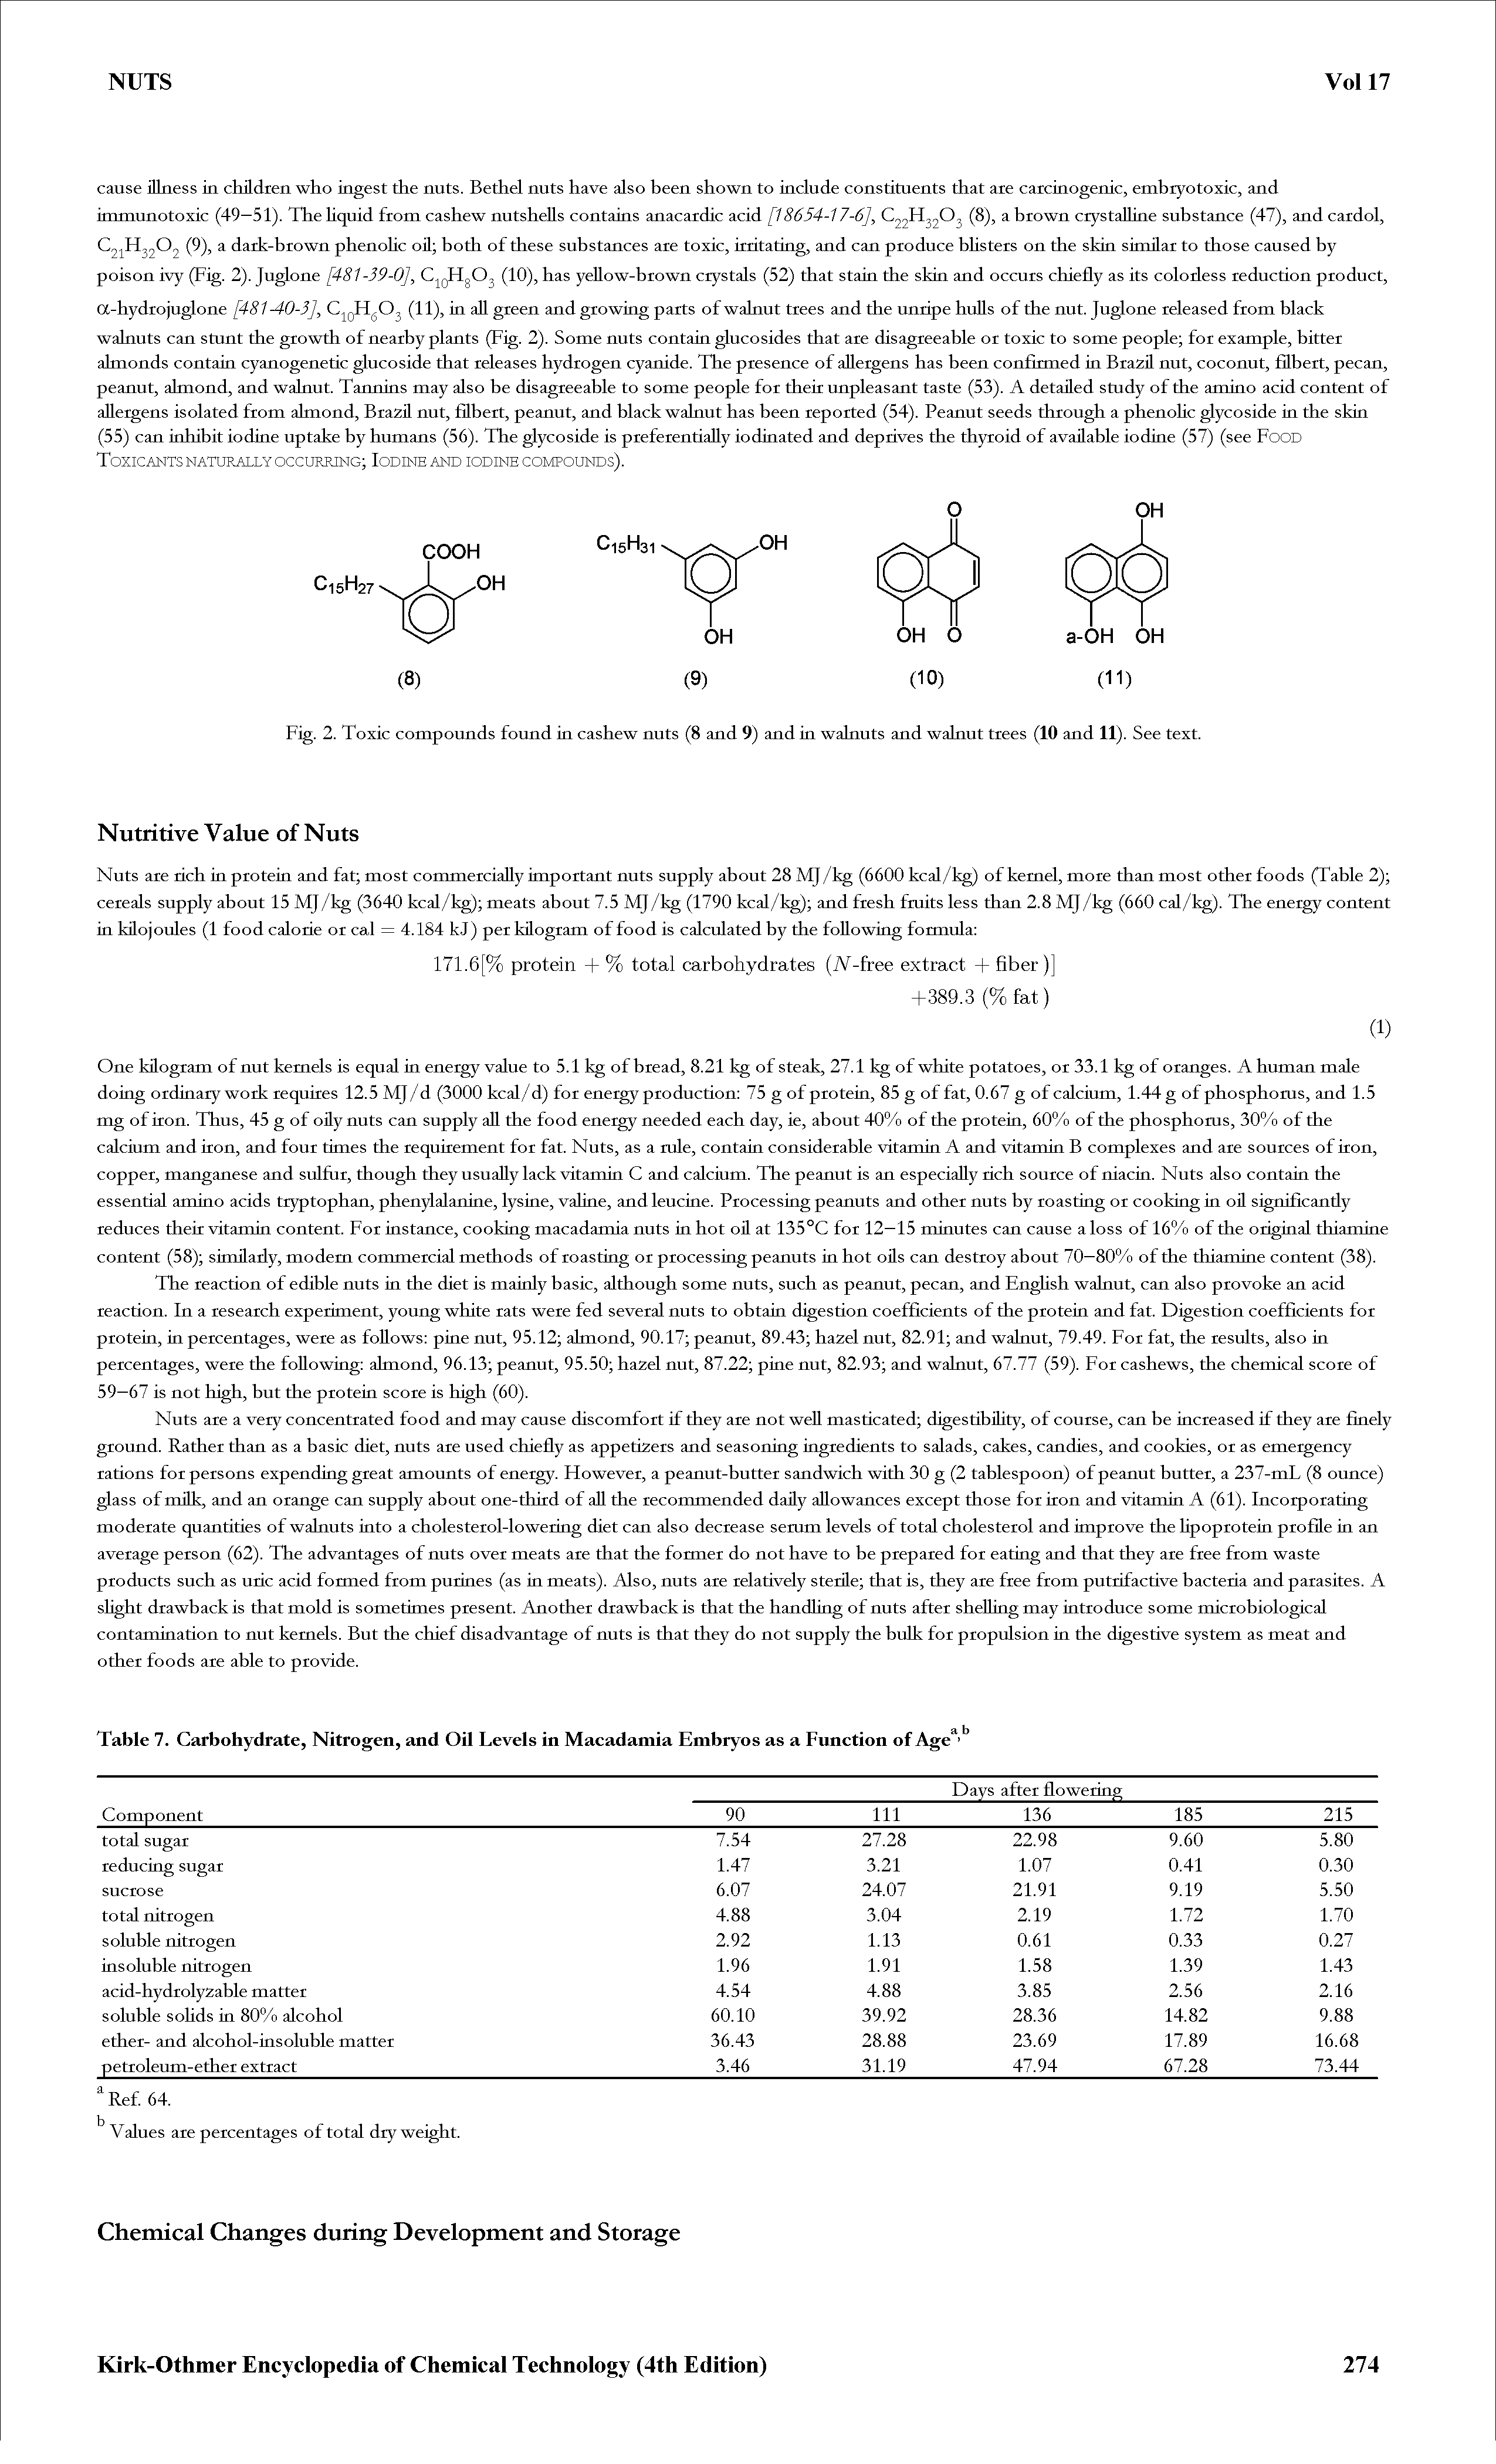 Fig. 2. Toxic compounds found in cashew nuts (8 and 9) and in walnuts and walnut trees (10 and 11). See text.